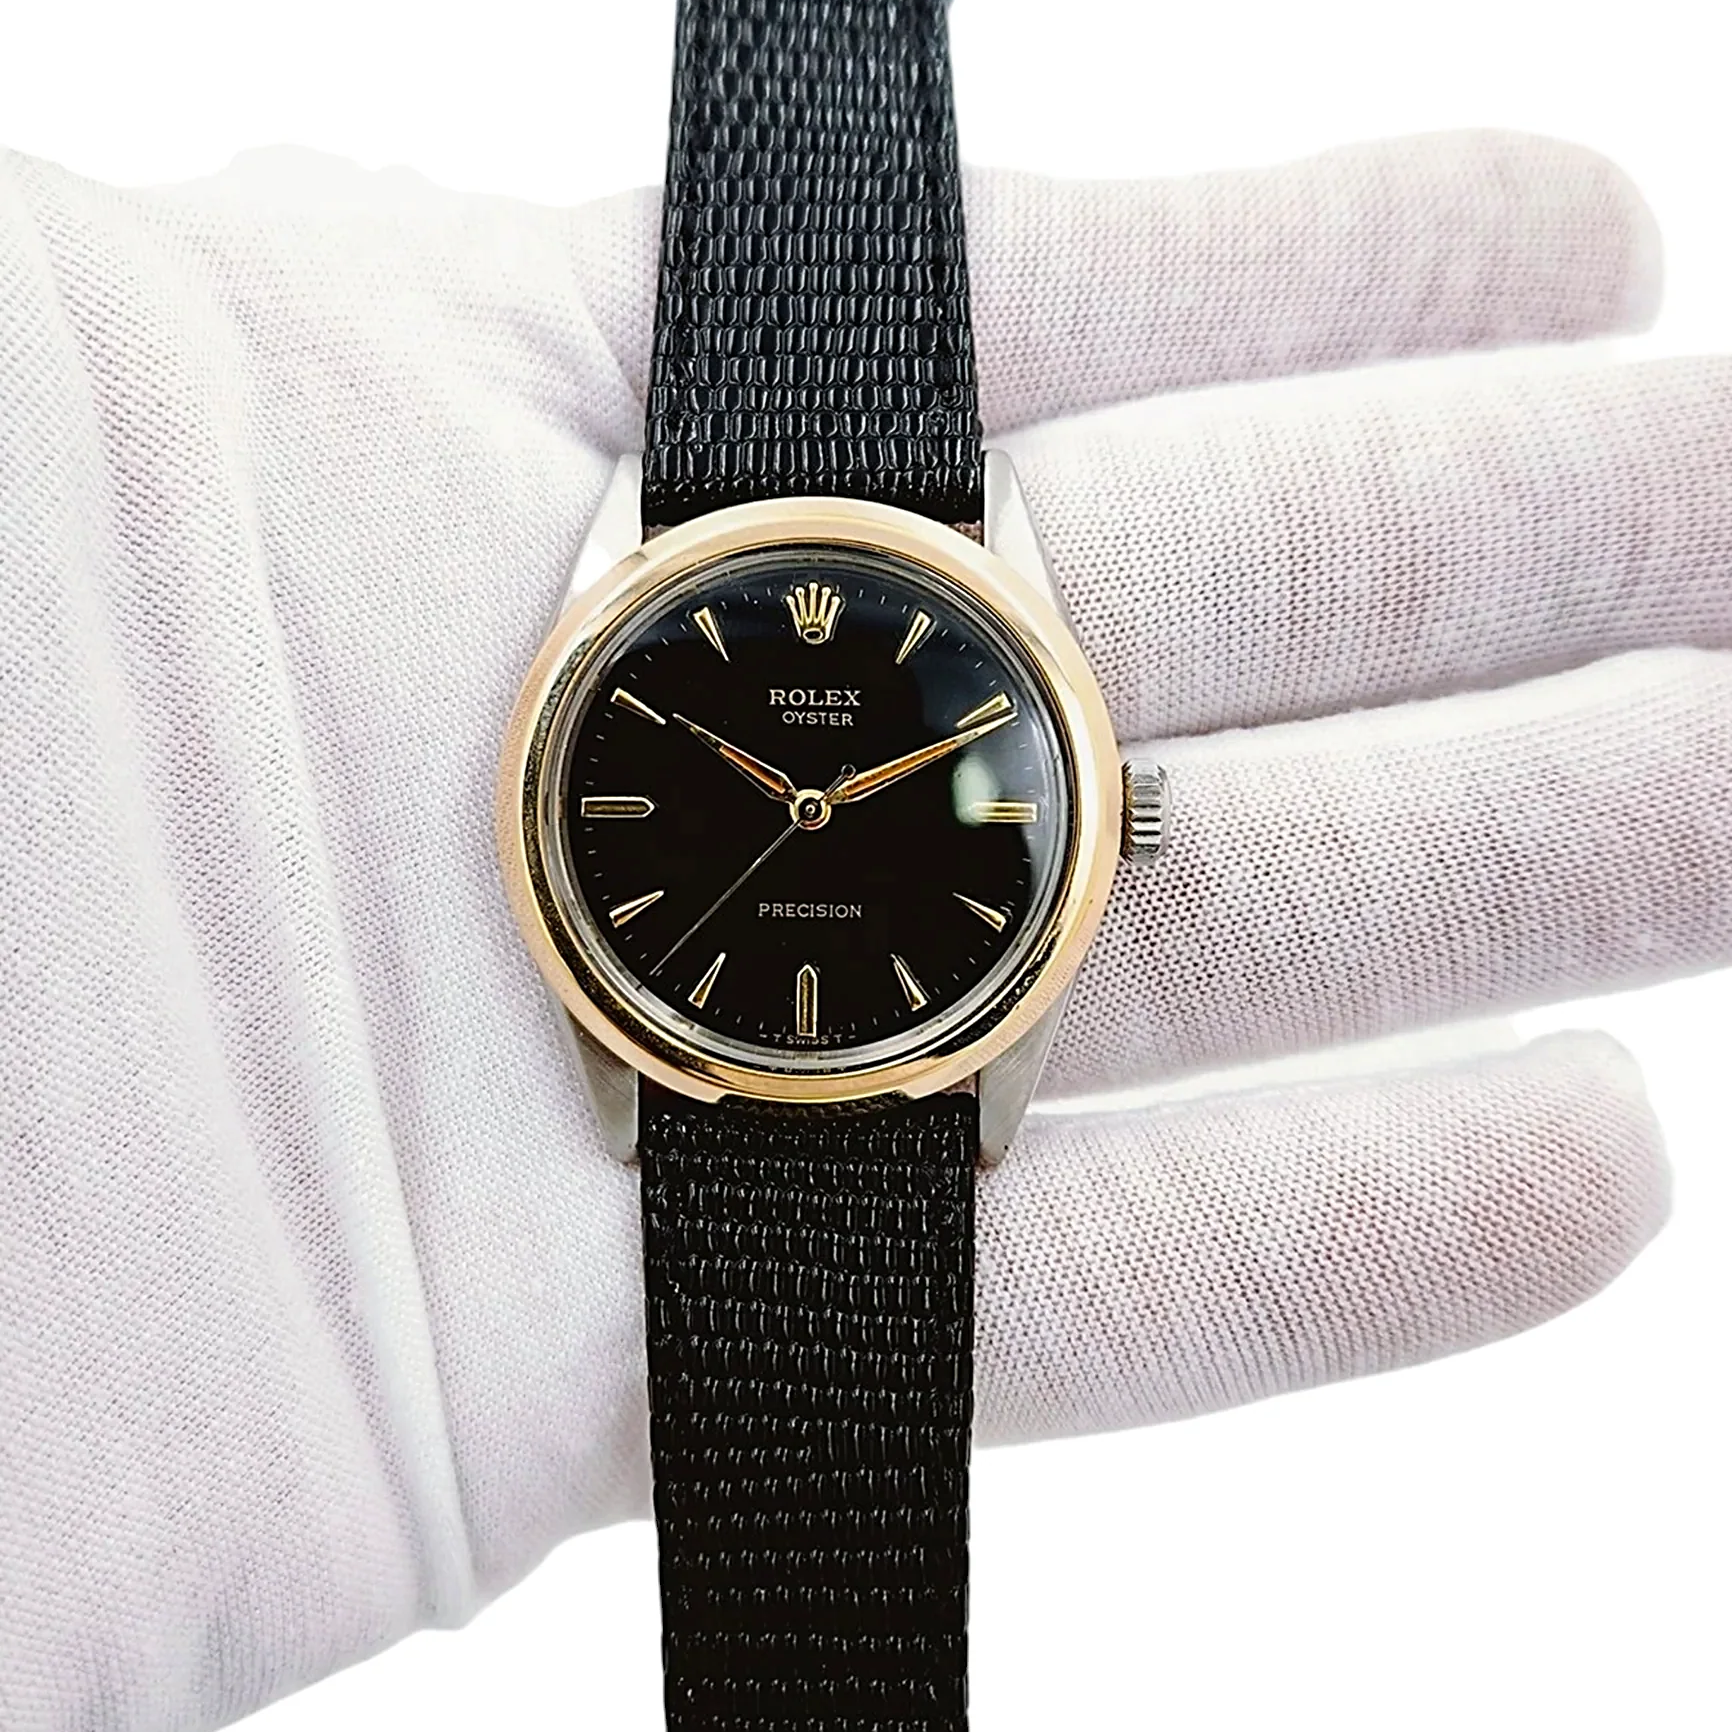 Men's Rolex 34mm Vintage Brevet 1955 Oyster Precision Two Tone Watch with Black Leather Strap and Black Dial. (Pre-Owned 6424)